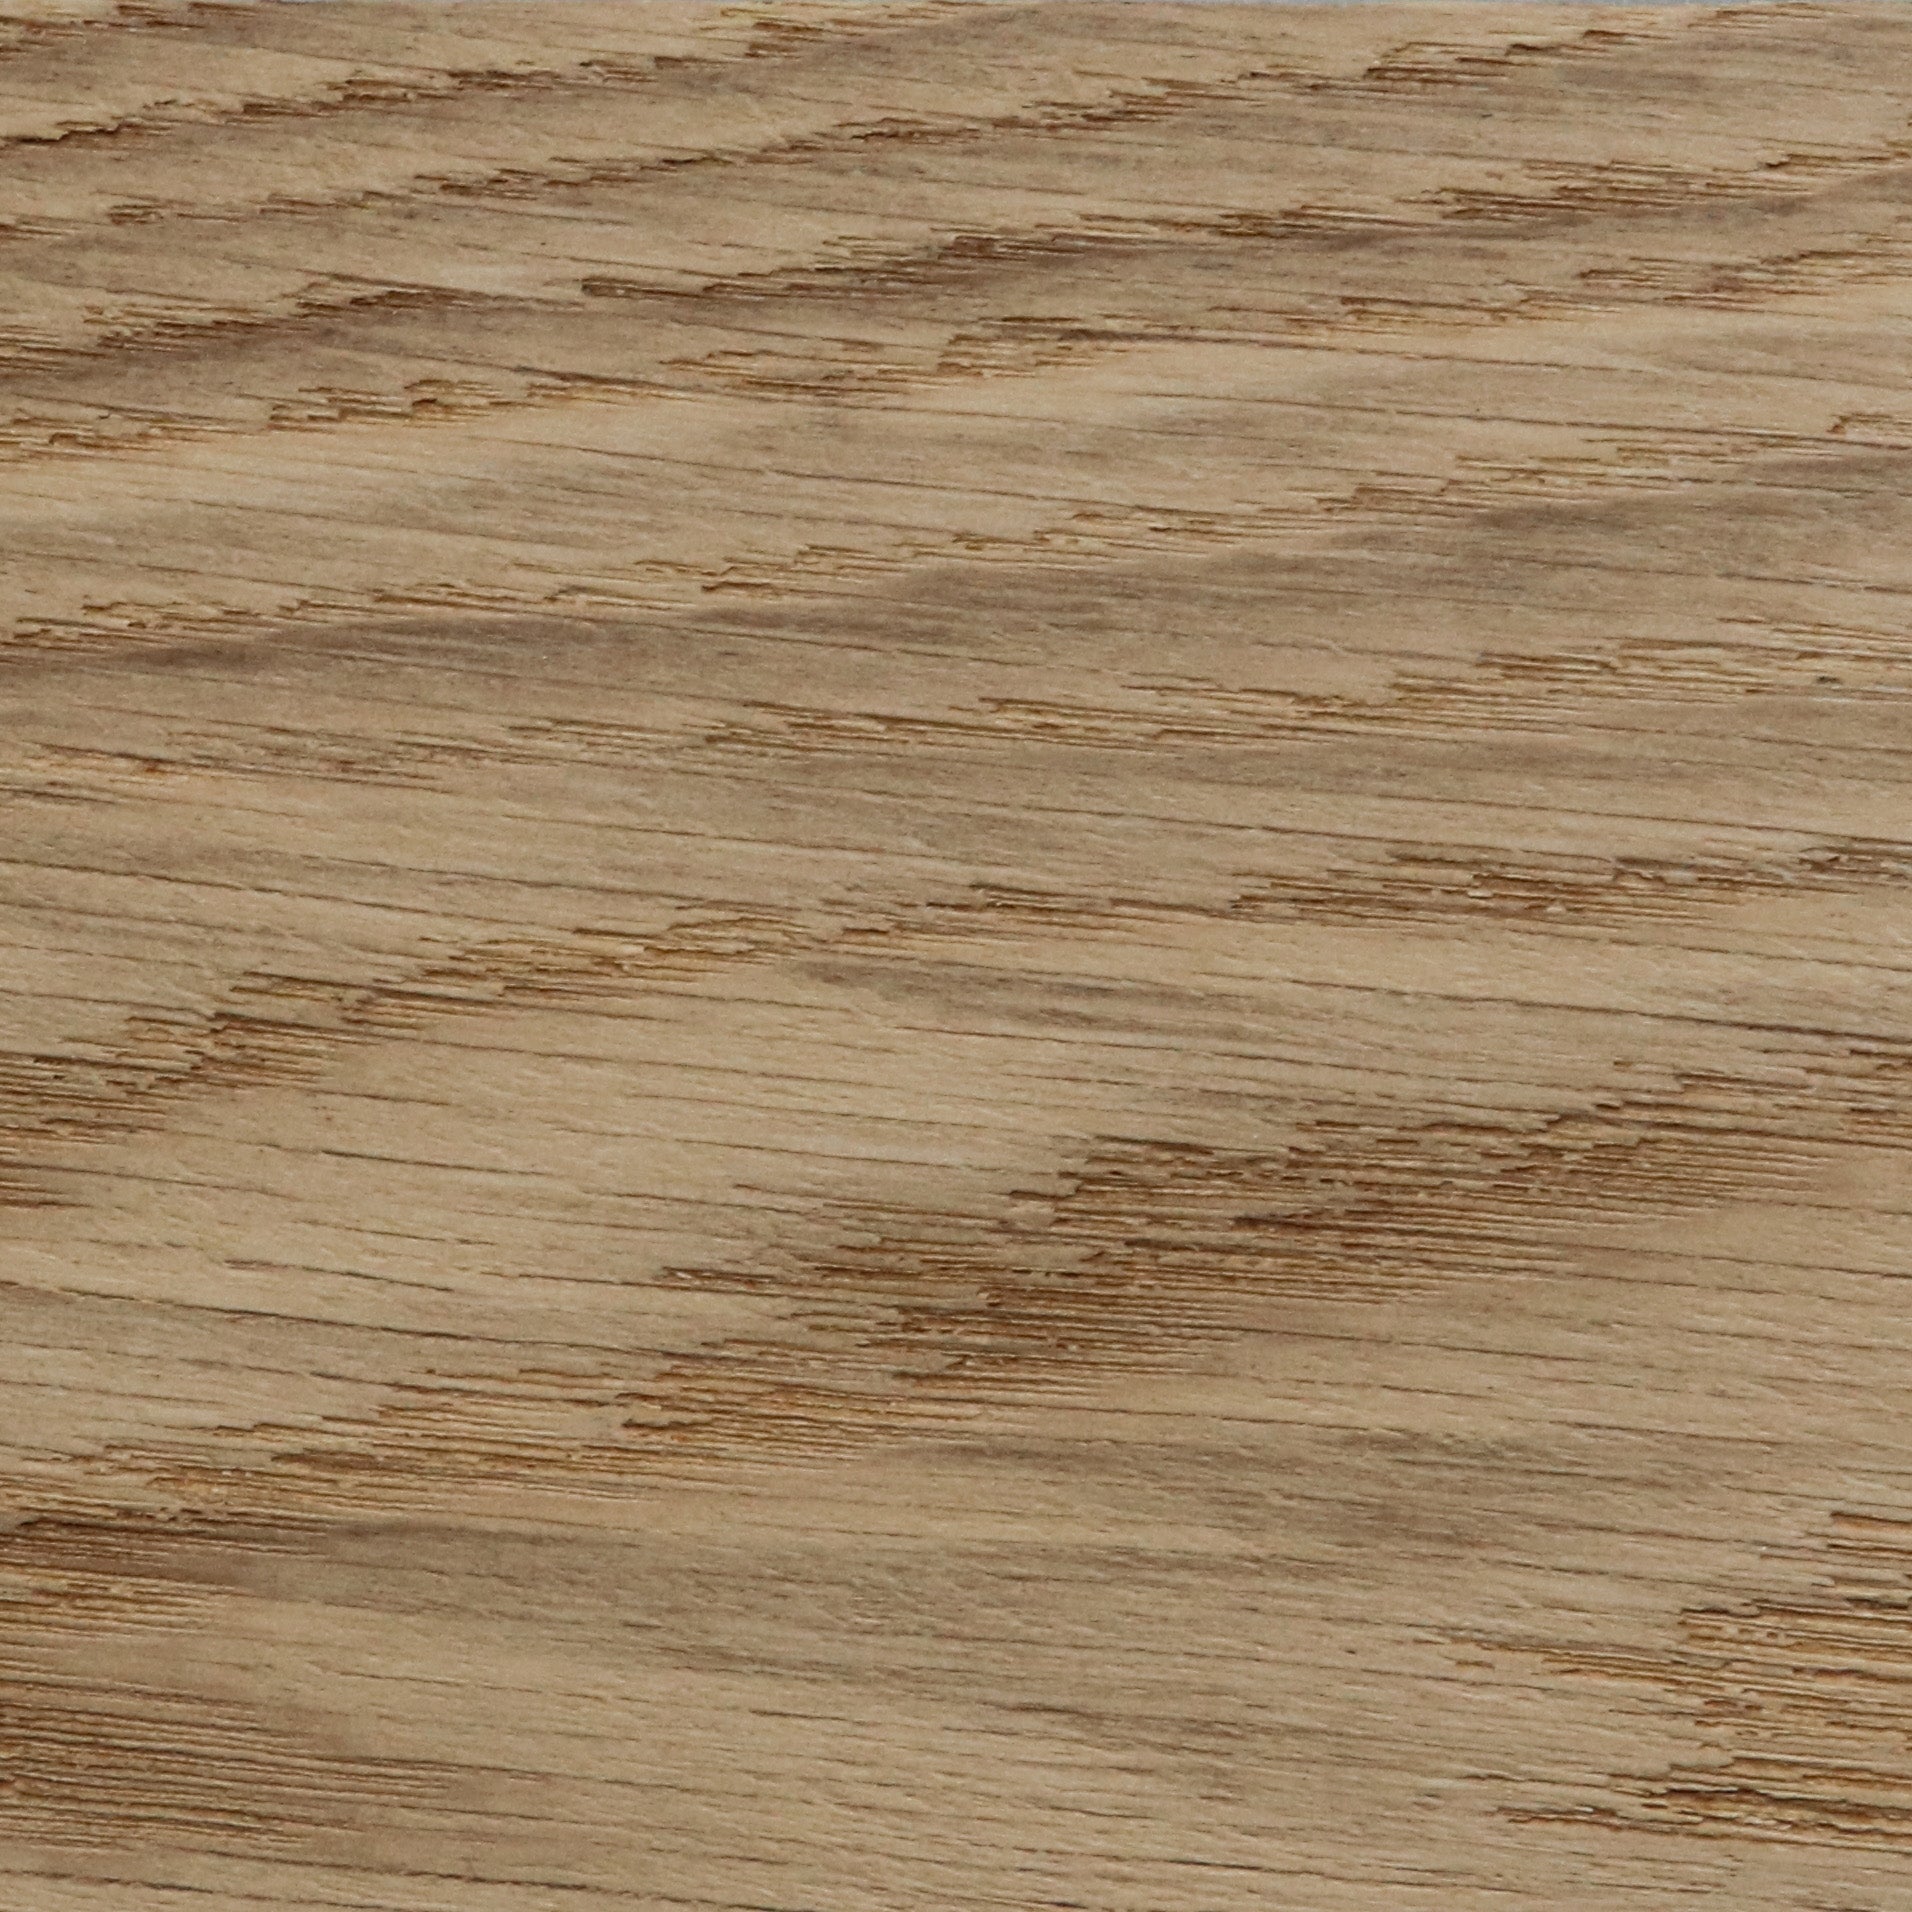 Solid Oak, Glossy Lacquer